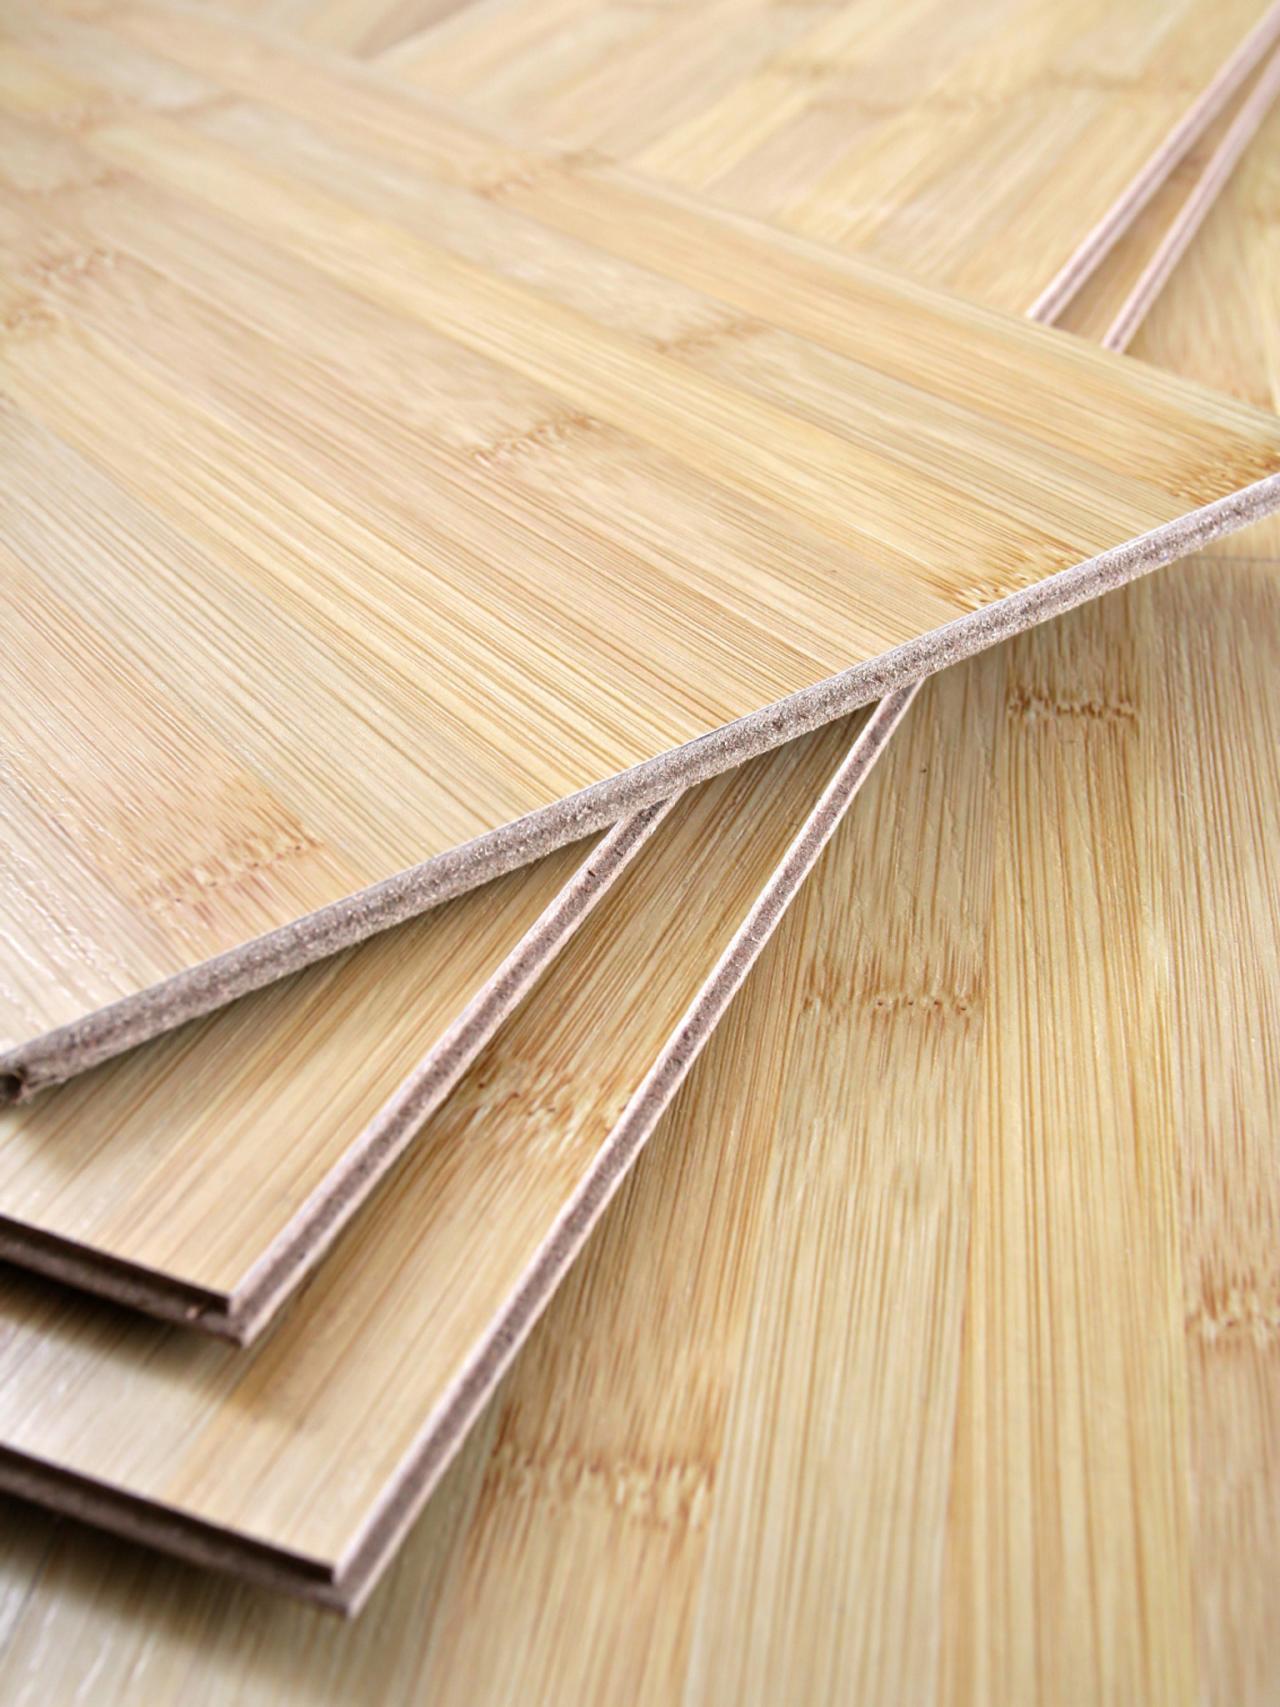 bamboo flooring related to: floor installation bamboo ... HBABQDY